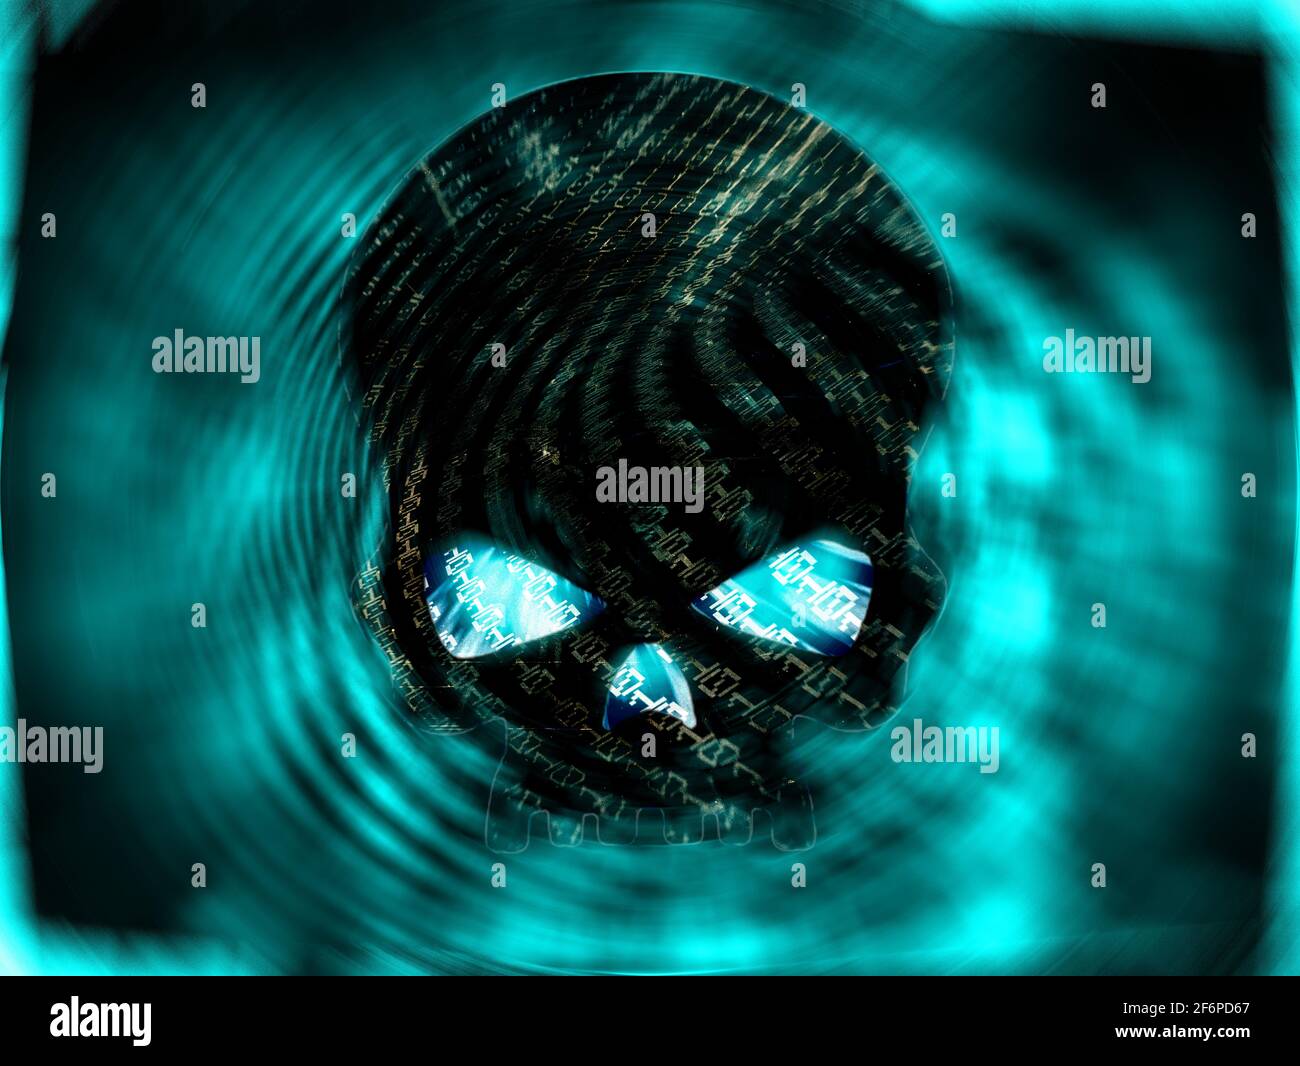 Black Pirate Skull with binary number across it, with warped swirling blue background Stock Photo